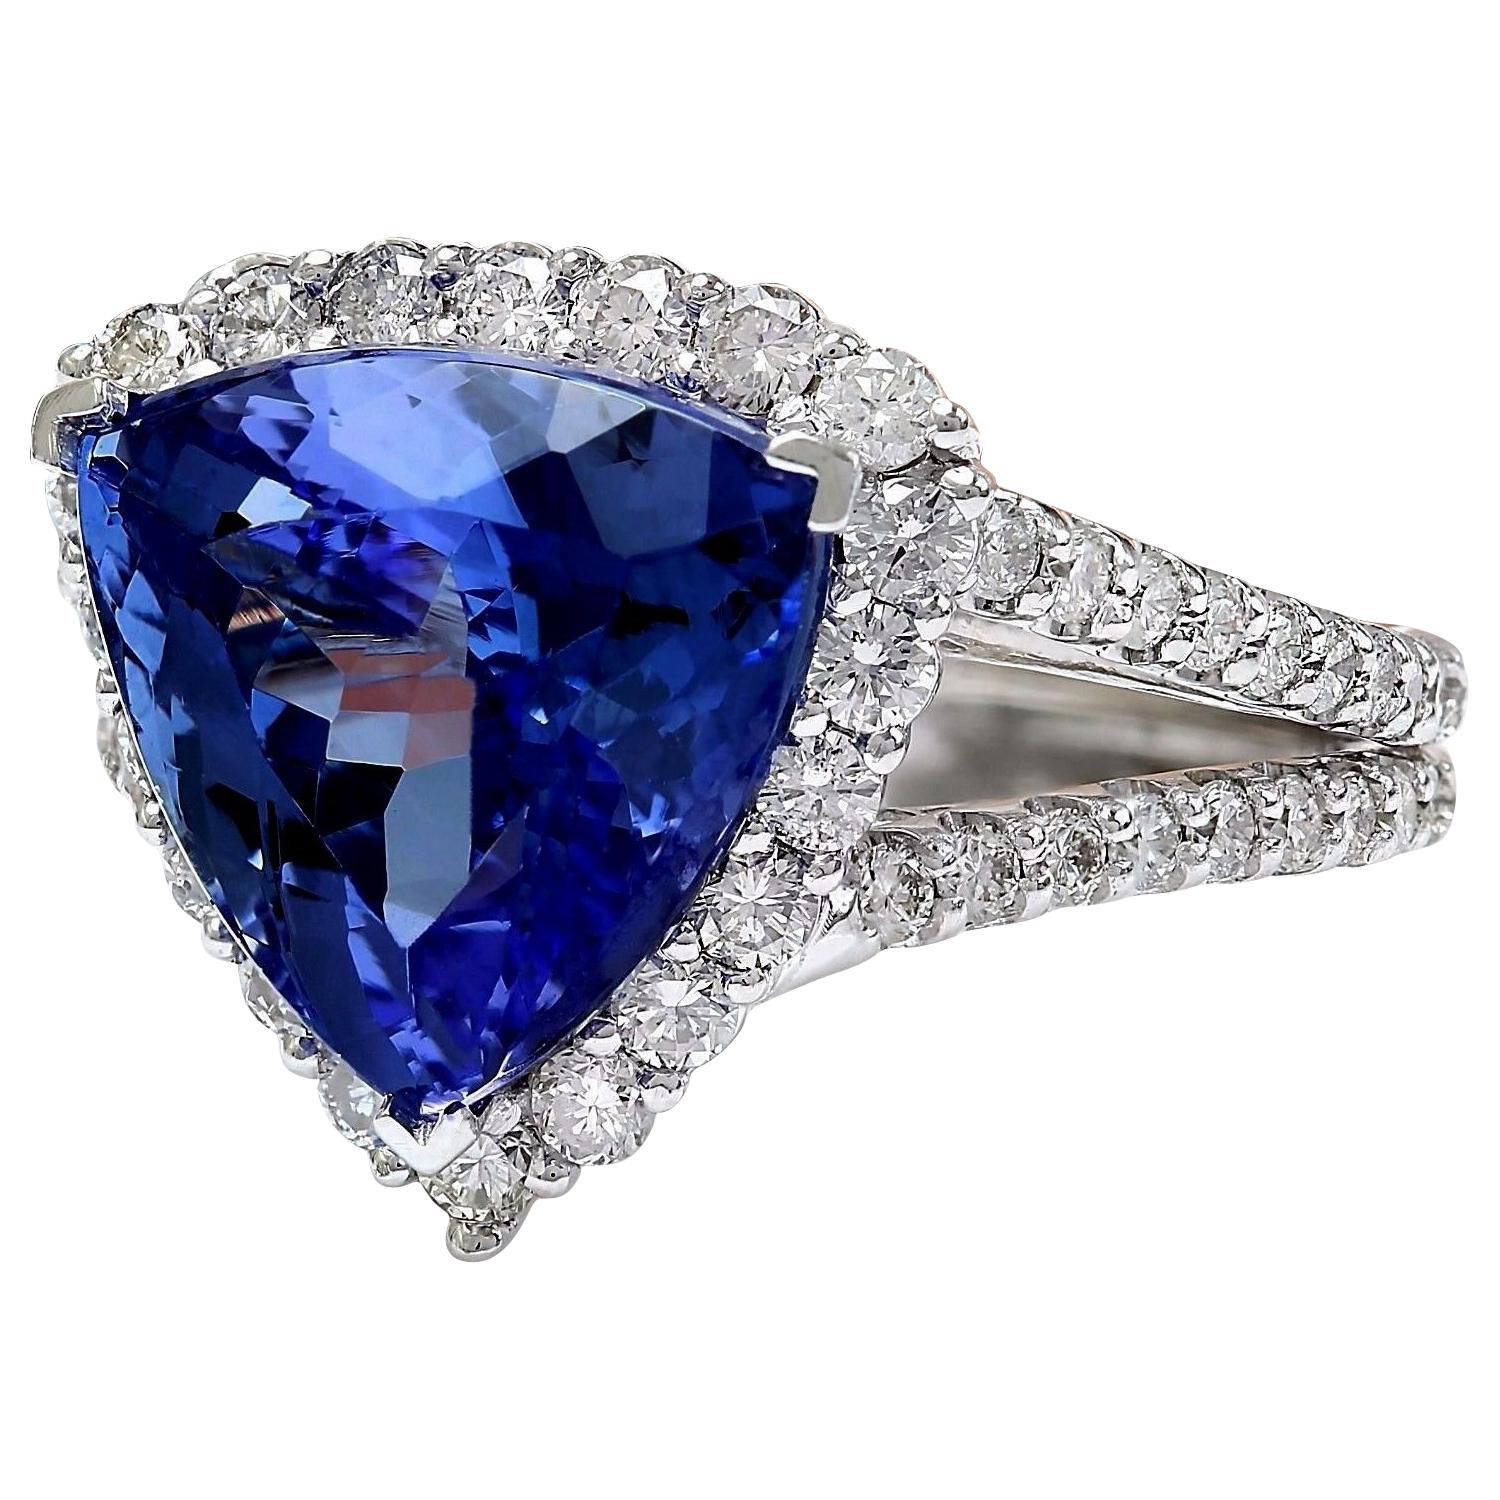 Introducing our stunning 7.07 Carat Tanzanite 14K Solid White Gold Diamond Ring. Crafted from luxurious 14K White Gold, this ring features a captivating trillion-cut Tanzanite weighing 5.41 carats, with dimensions of 11.00x11.00 mm, showcasing its